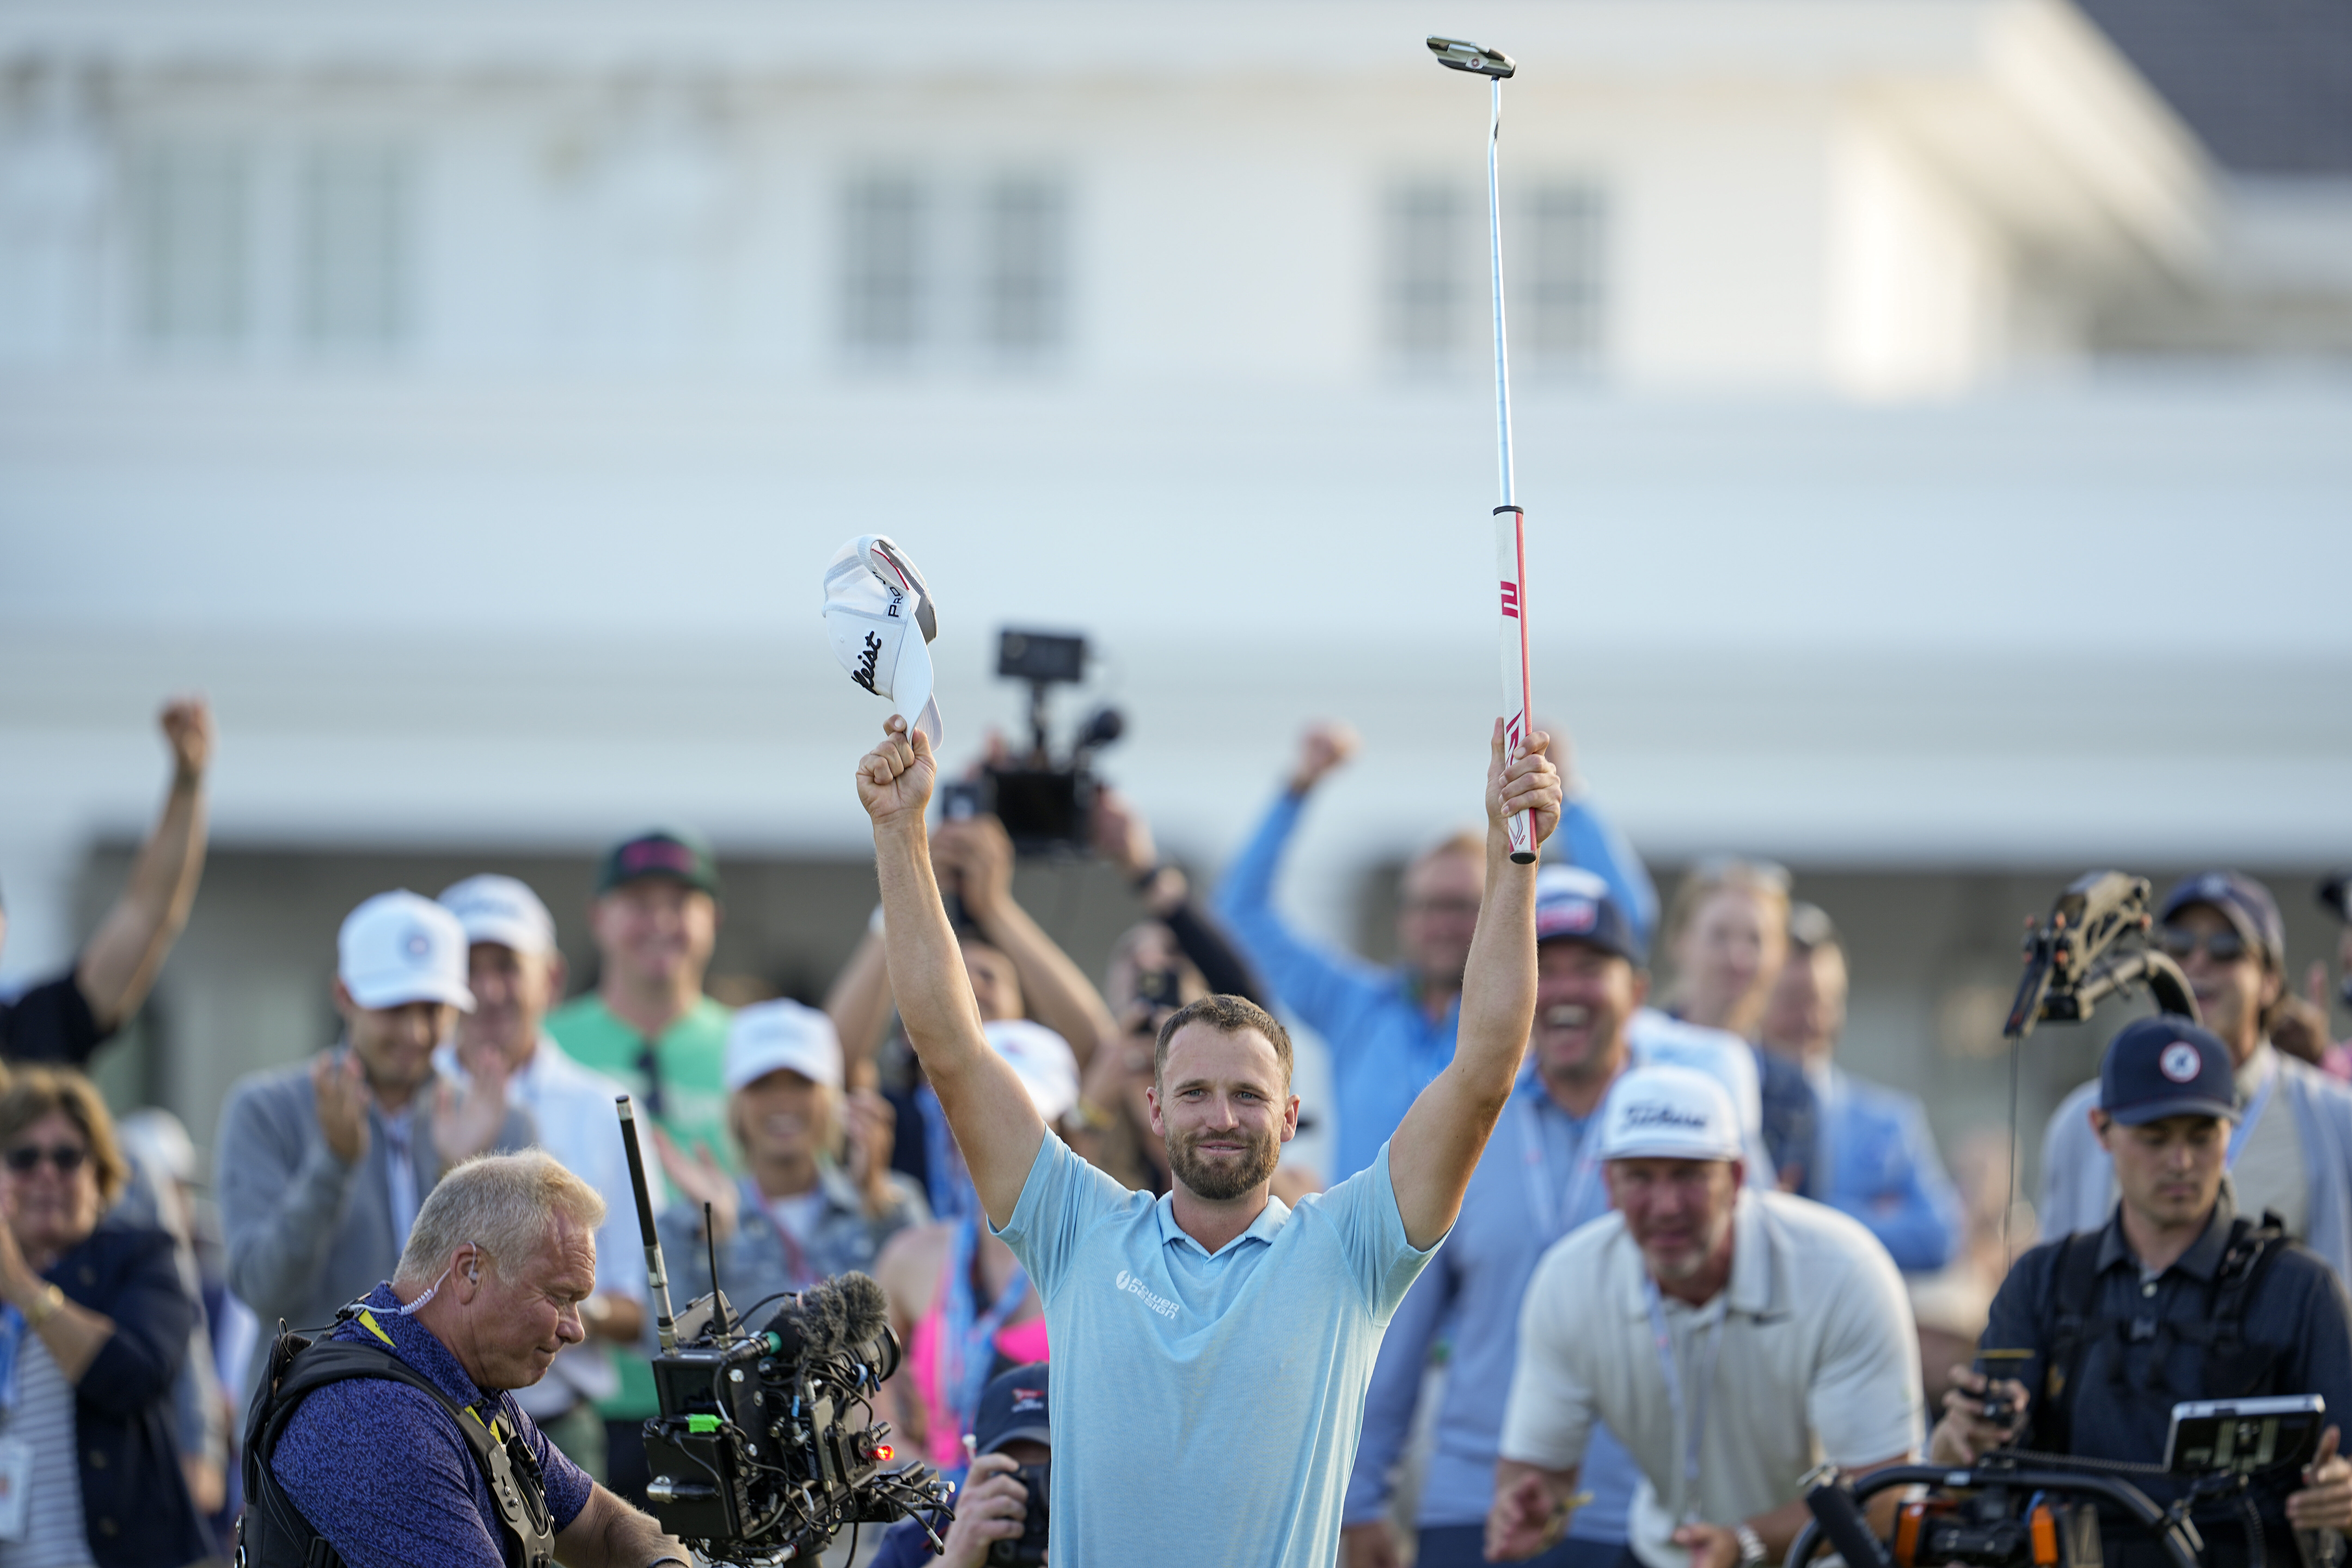 Wyndham Clark celebrates on the 18th hole after winning the U.S. Open golf tournament at Los Angeles Country Club on Sunday, June 18, 2023, in Los Angeles. (AP Photo/George Walker IV)